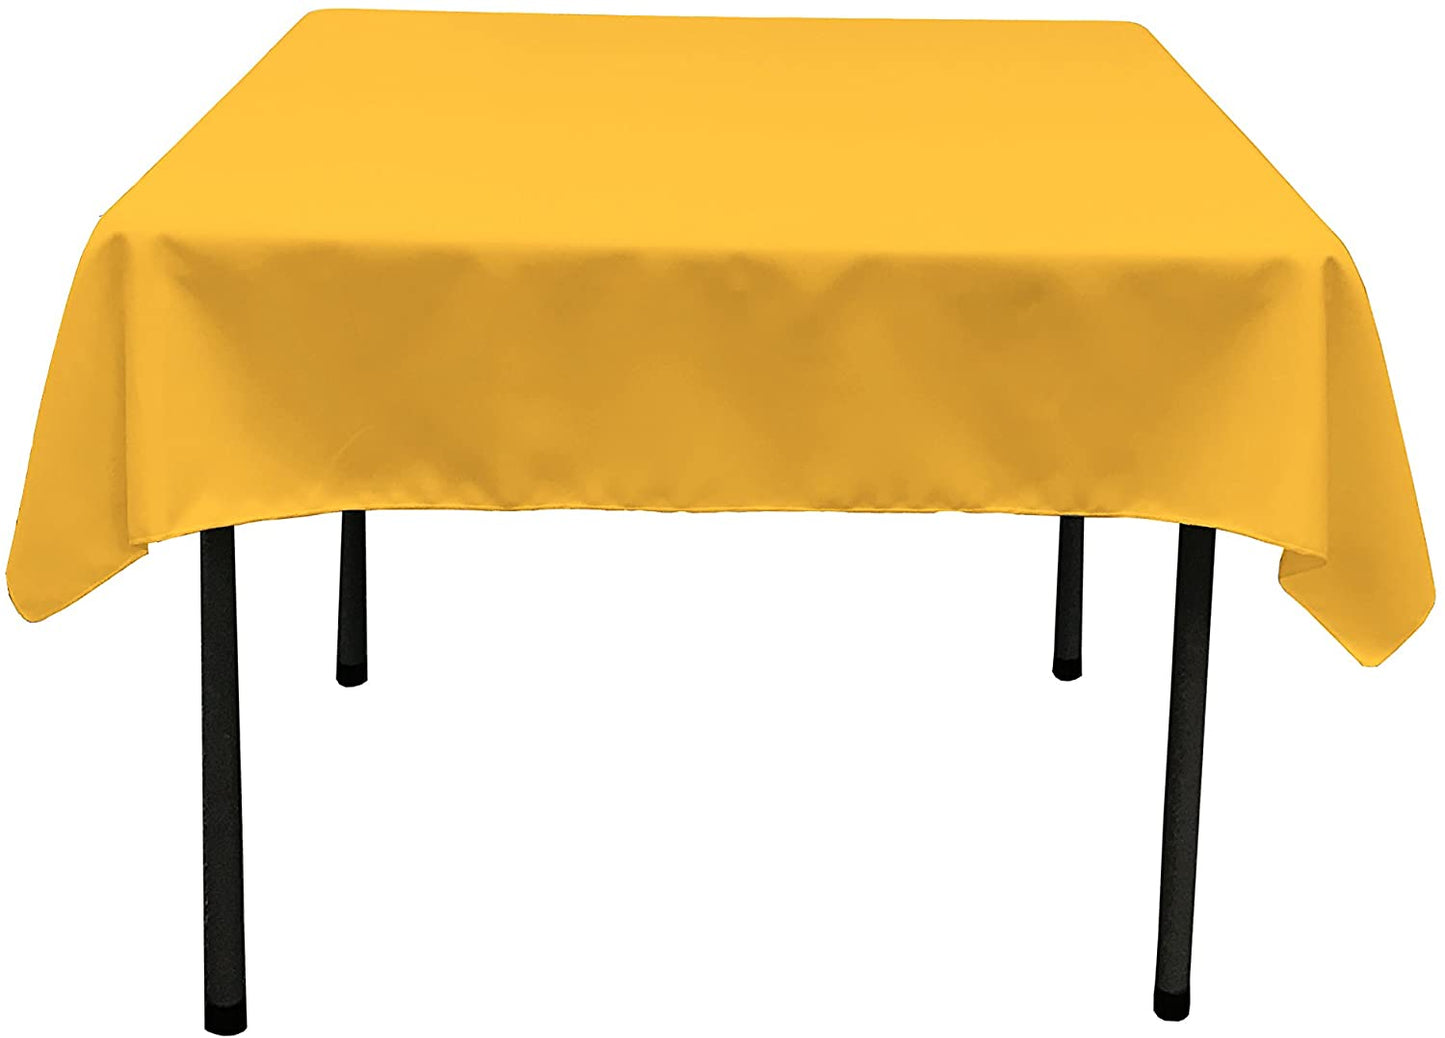 Polyester Poplin Washable Square Tablecloth, Stain and Wrinkle Resistant Table Cover Dk Yellow